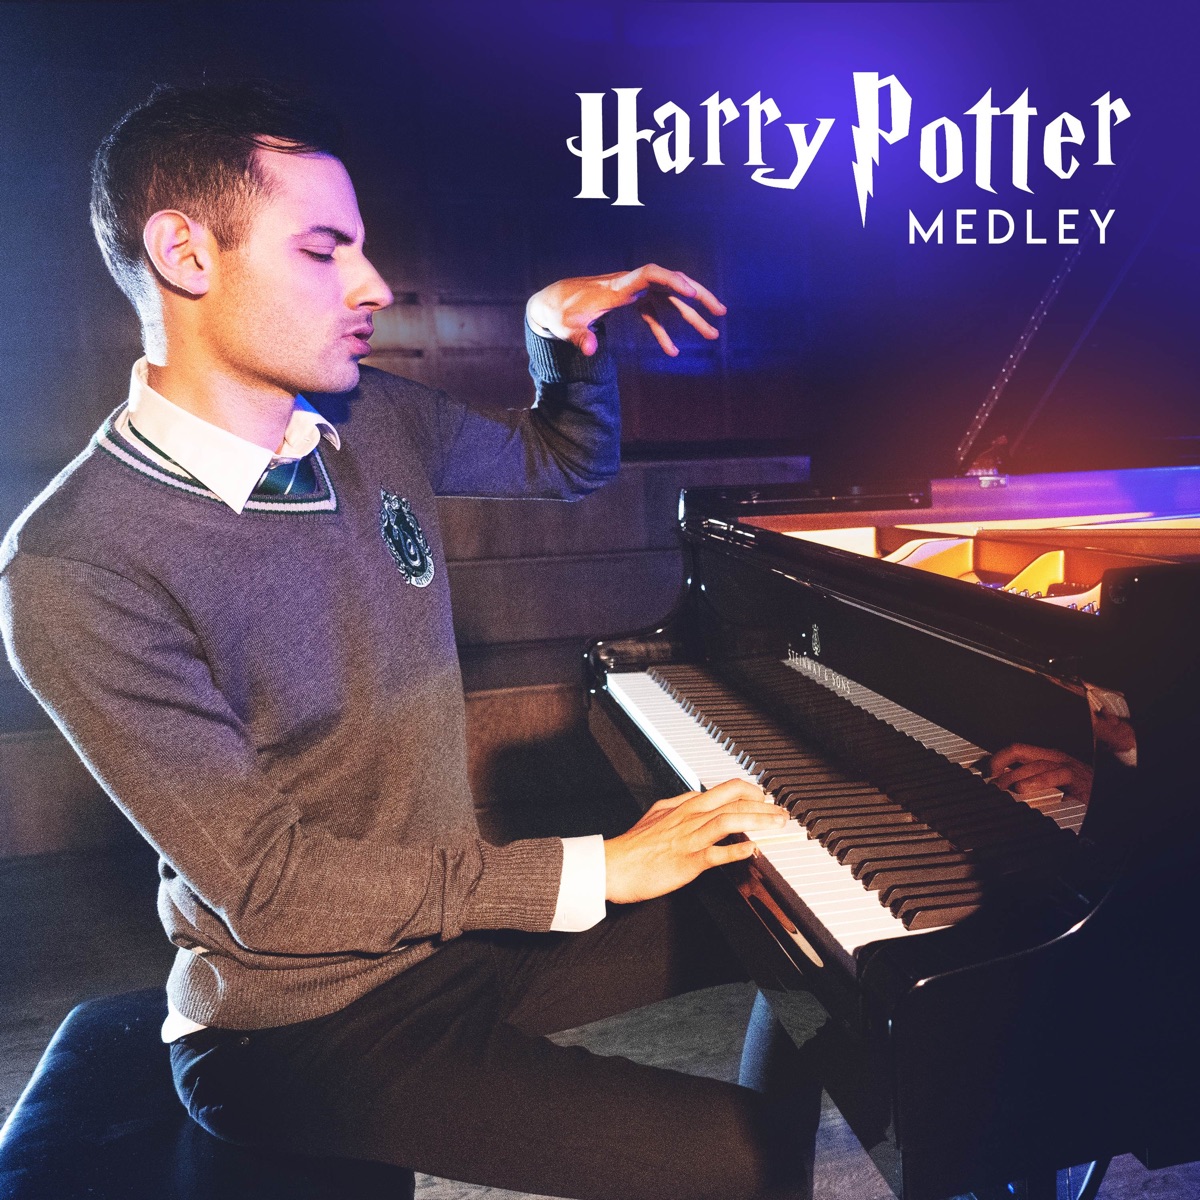 Harry Potter Medley: Hedwig's Theme / Harry's Wonderful World - Single by  Peter Bence on Apple Music